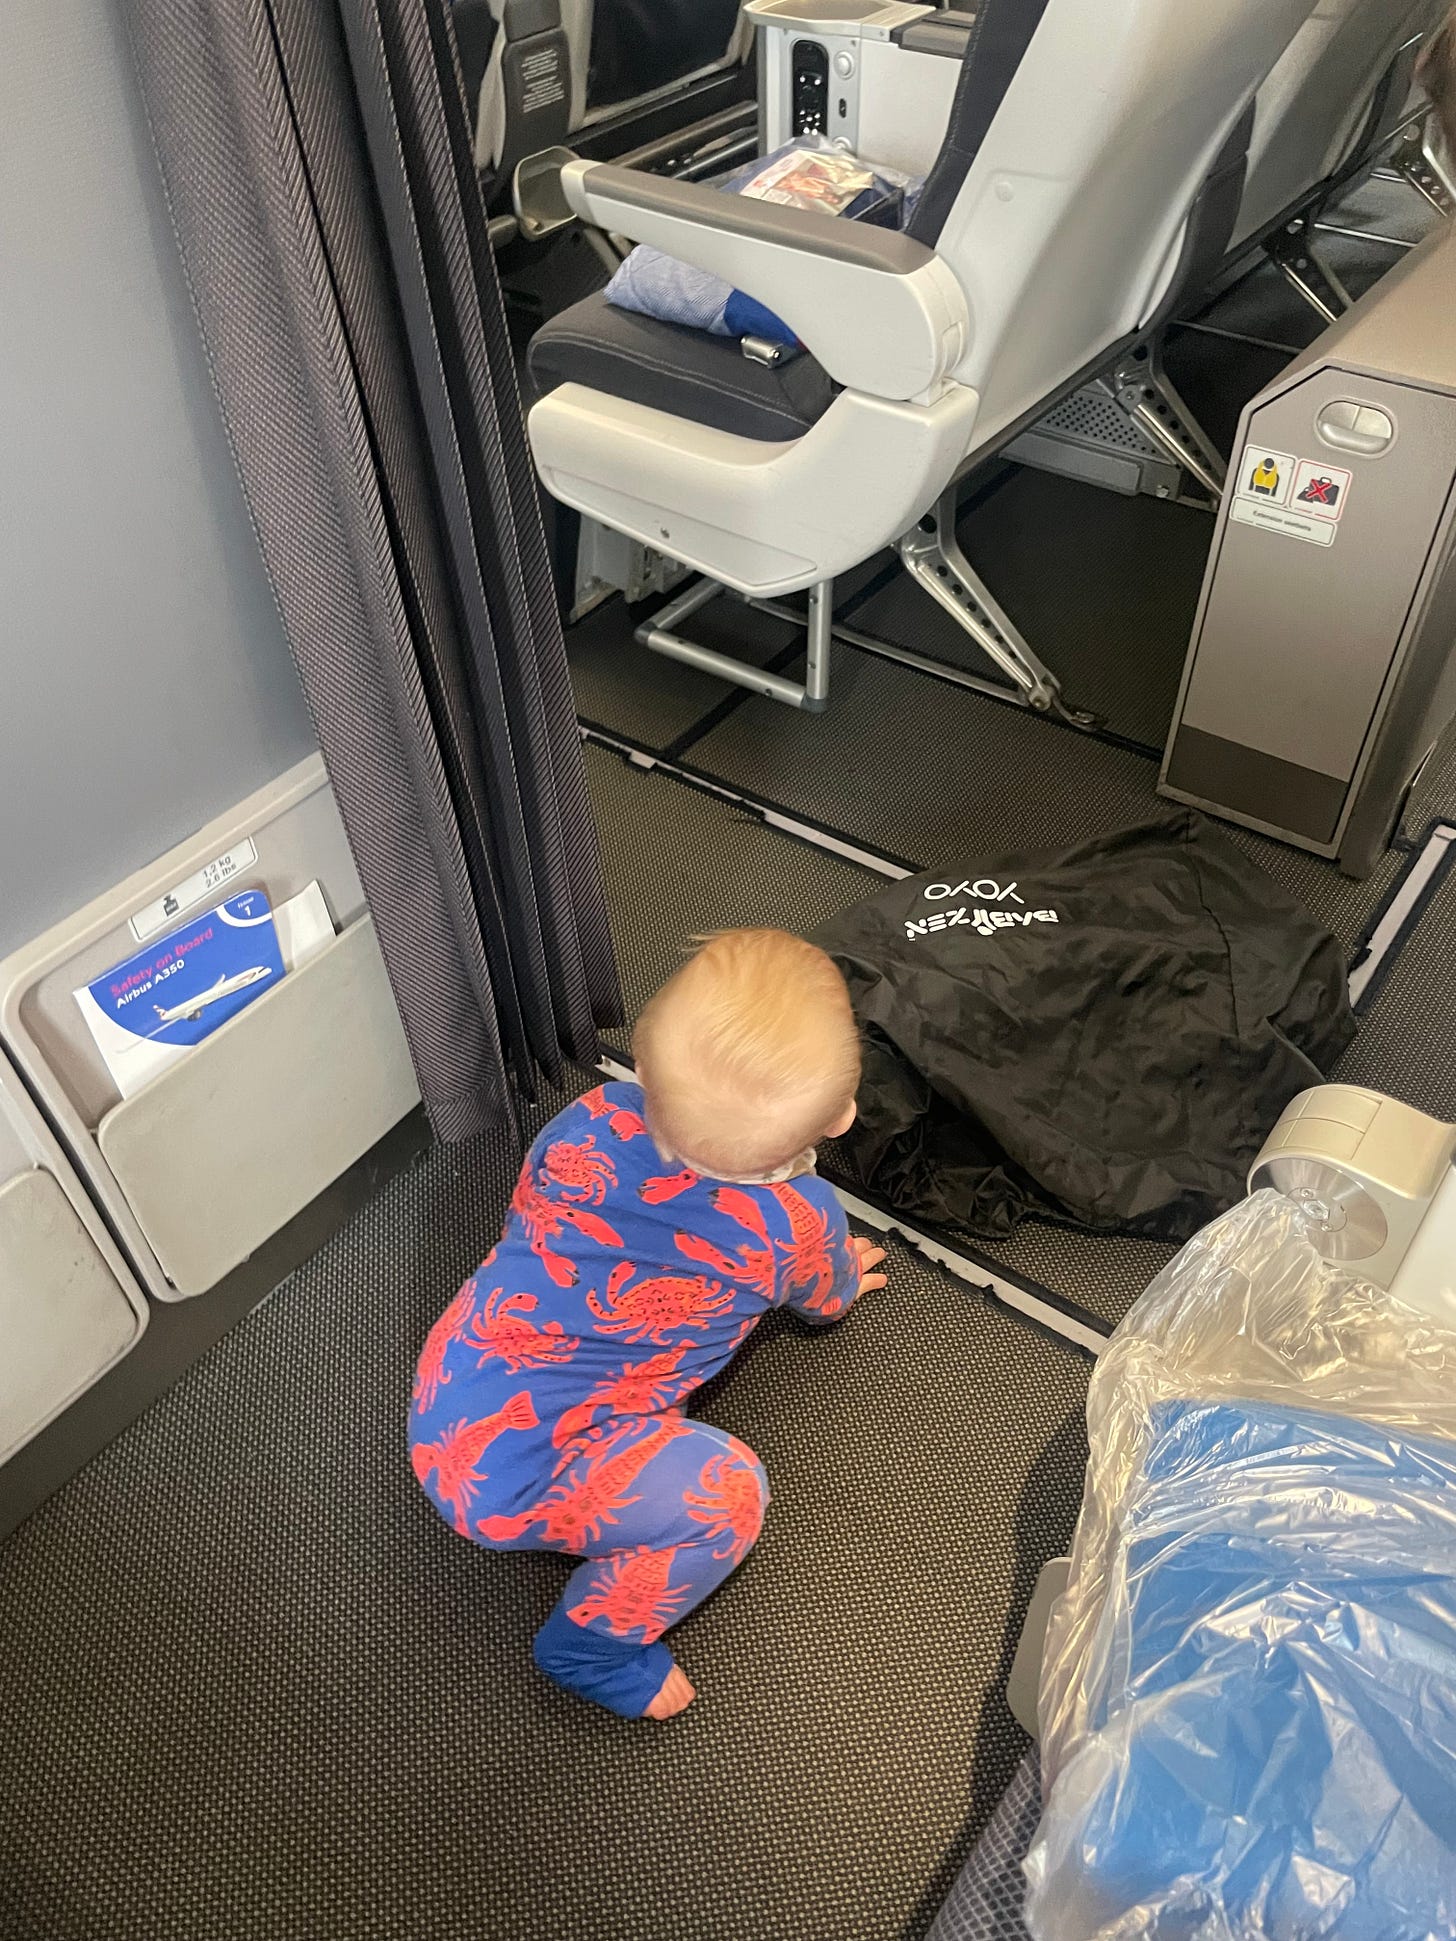 A baby in a blue and red lobster onesie sits on the floor of the plane, looking away from the camera, about to crawl off.